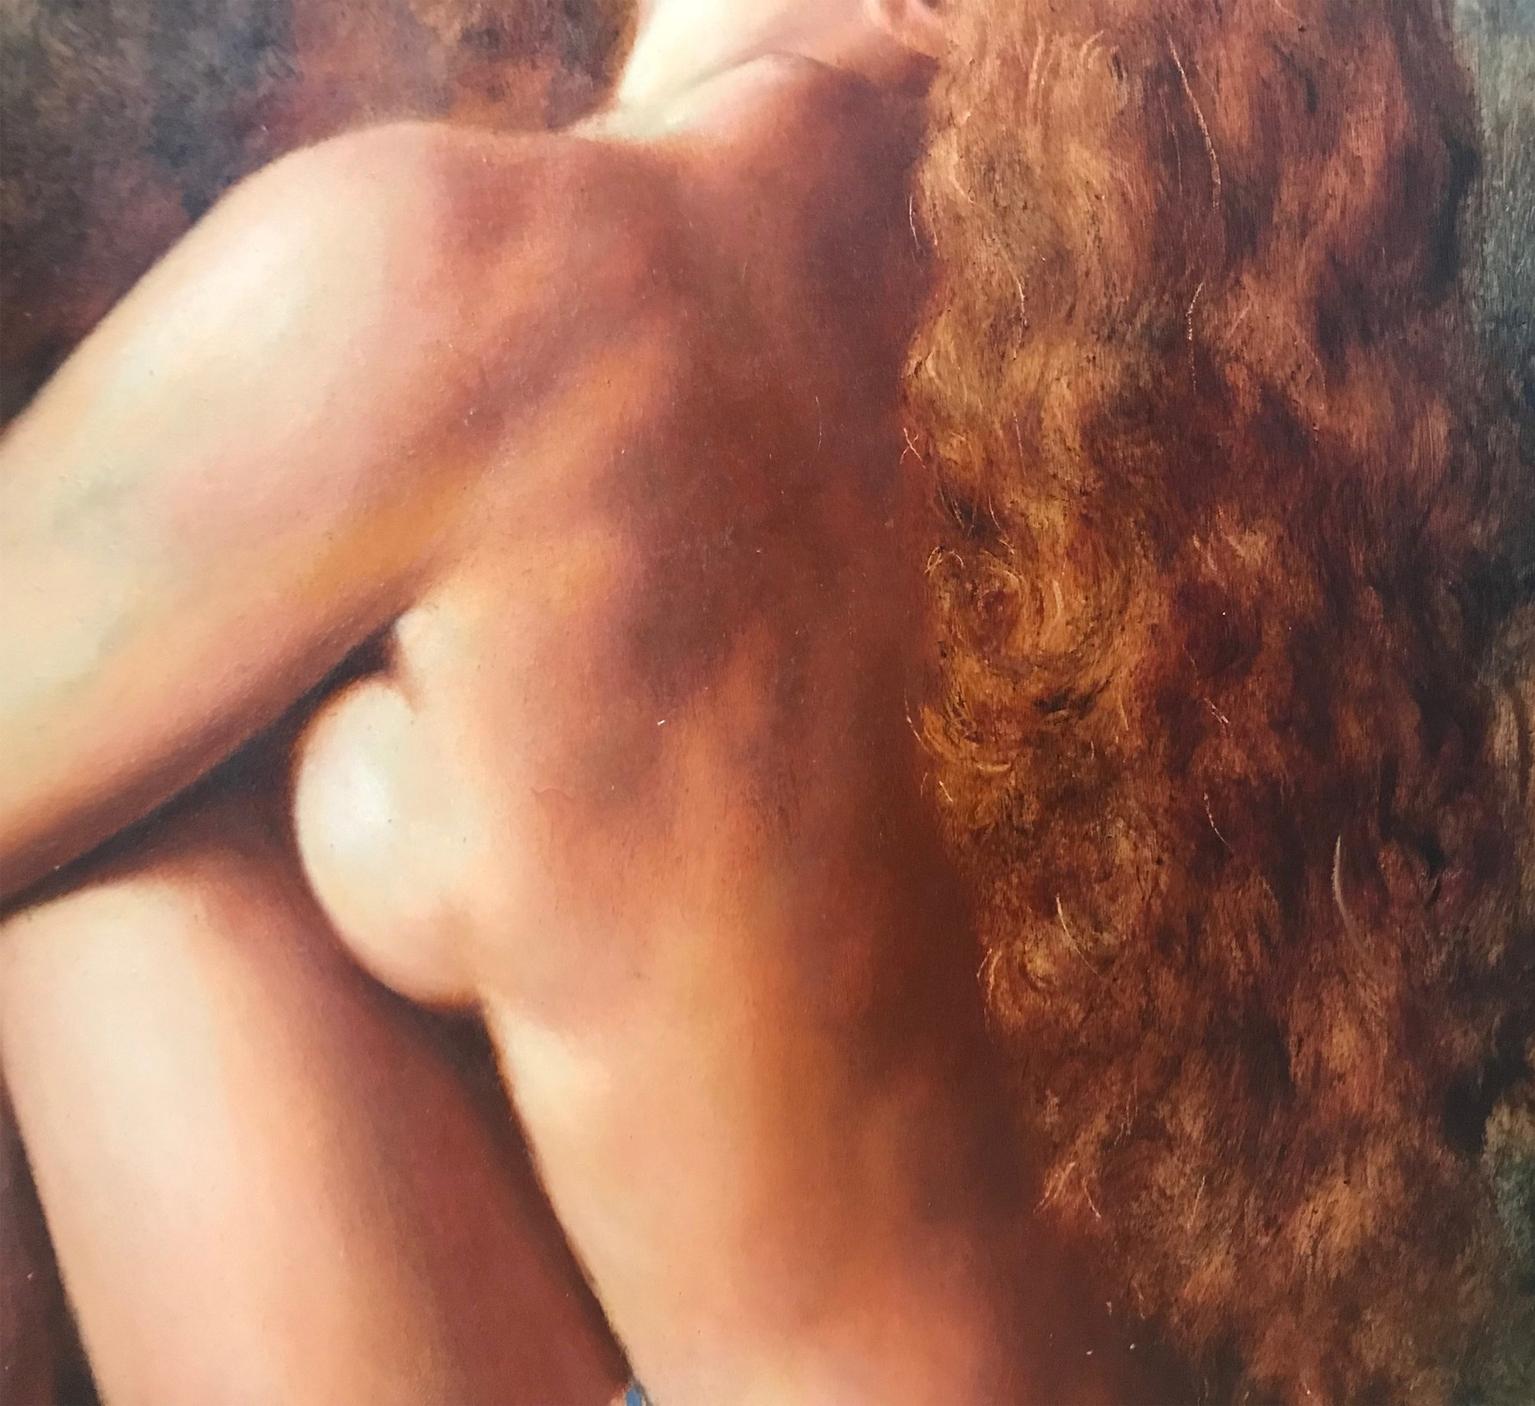 Nude growing from nothing - Painting by Unknown